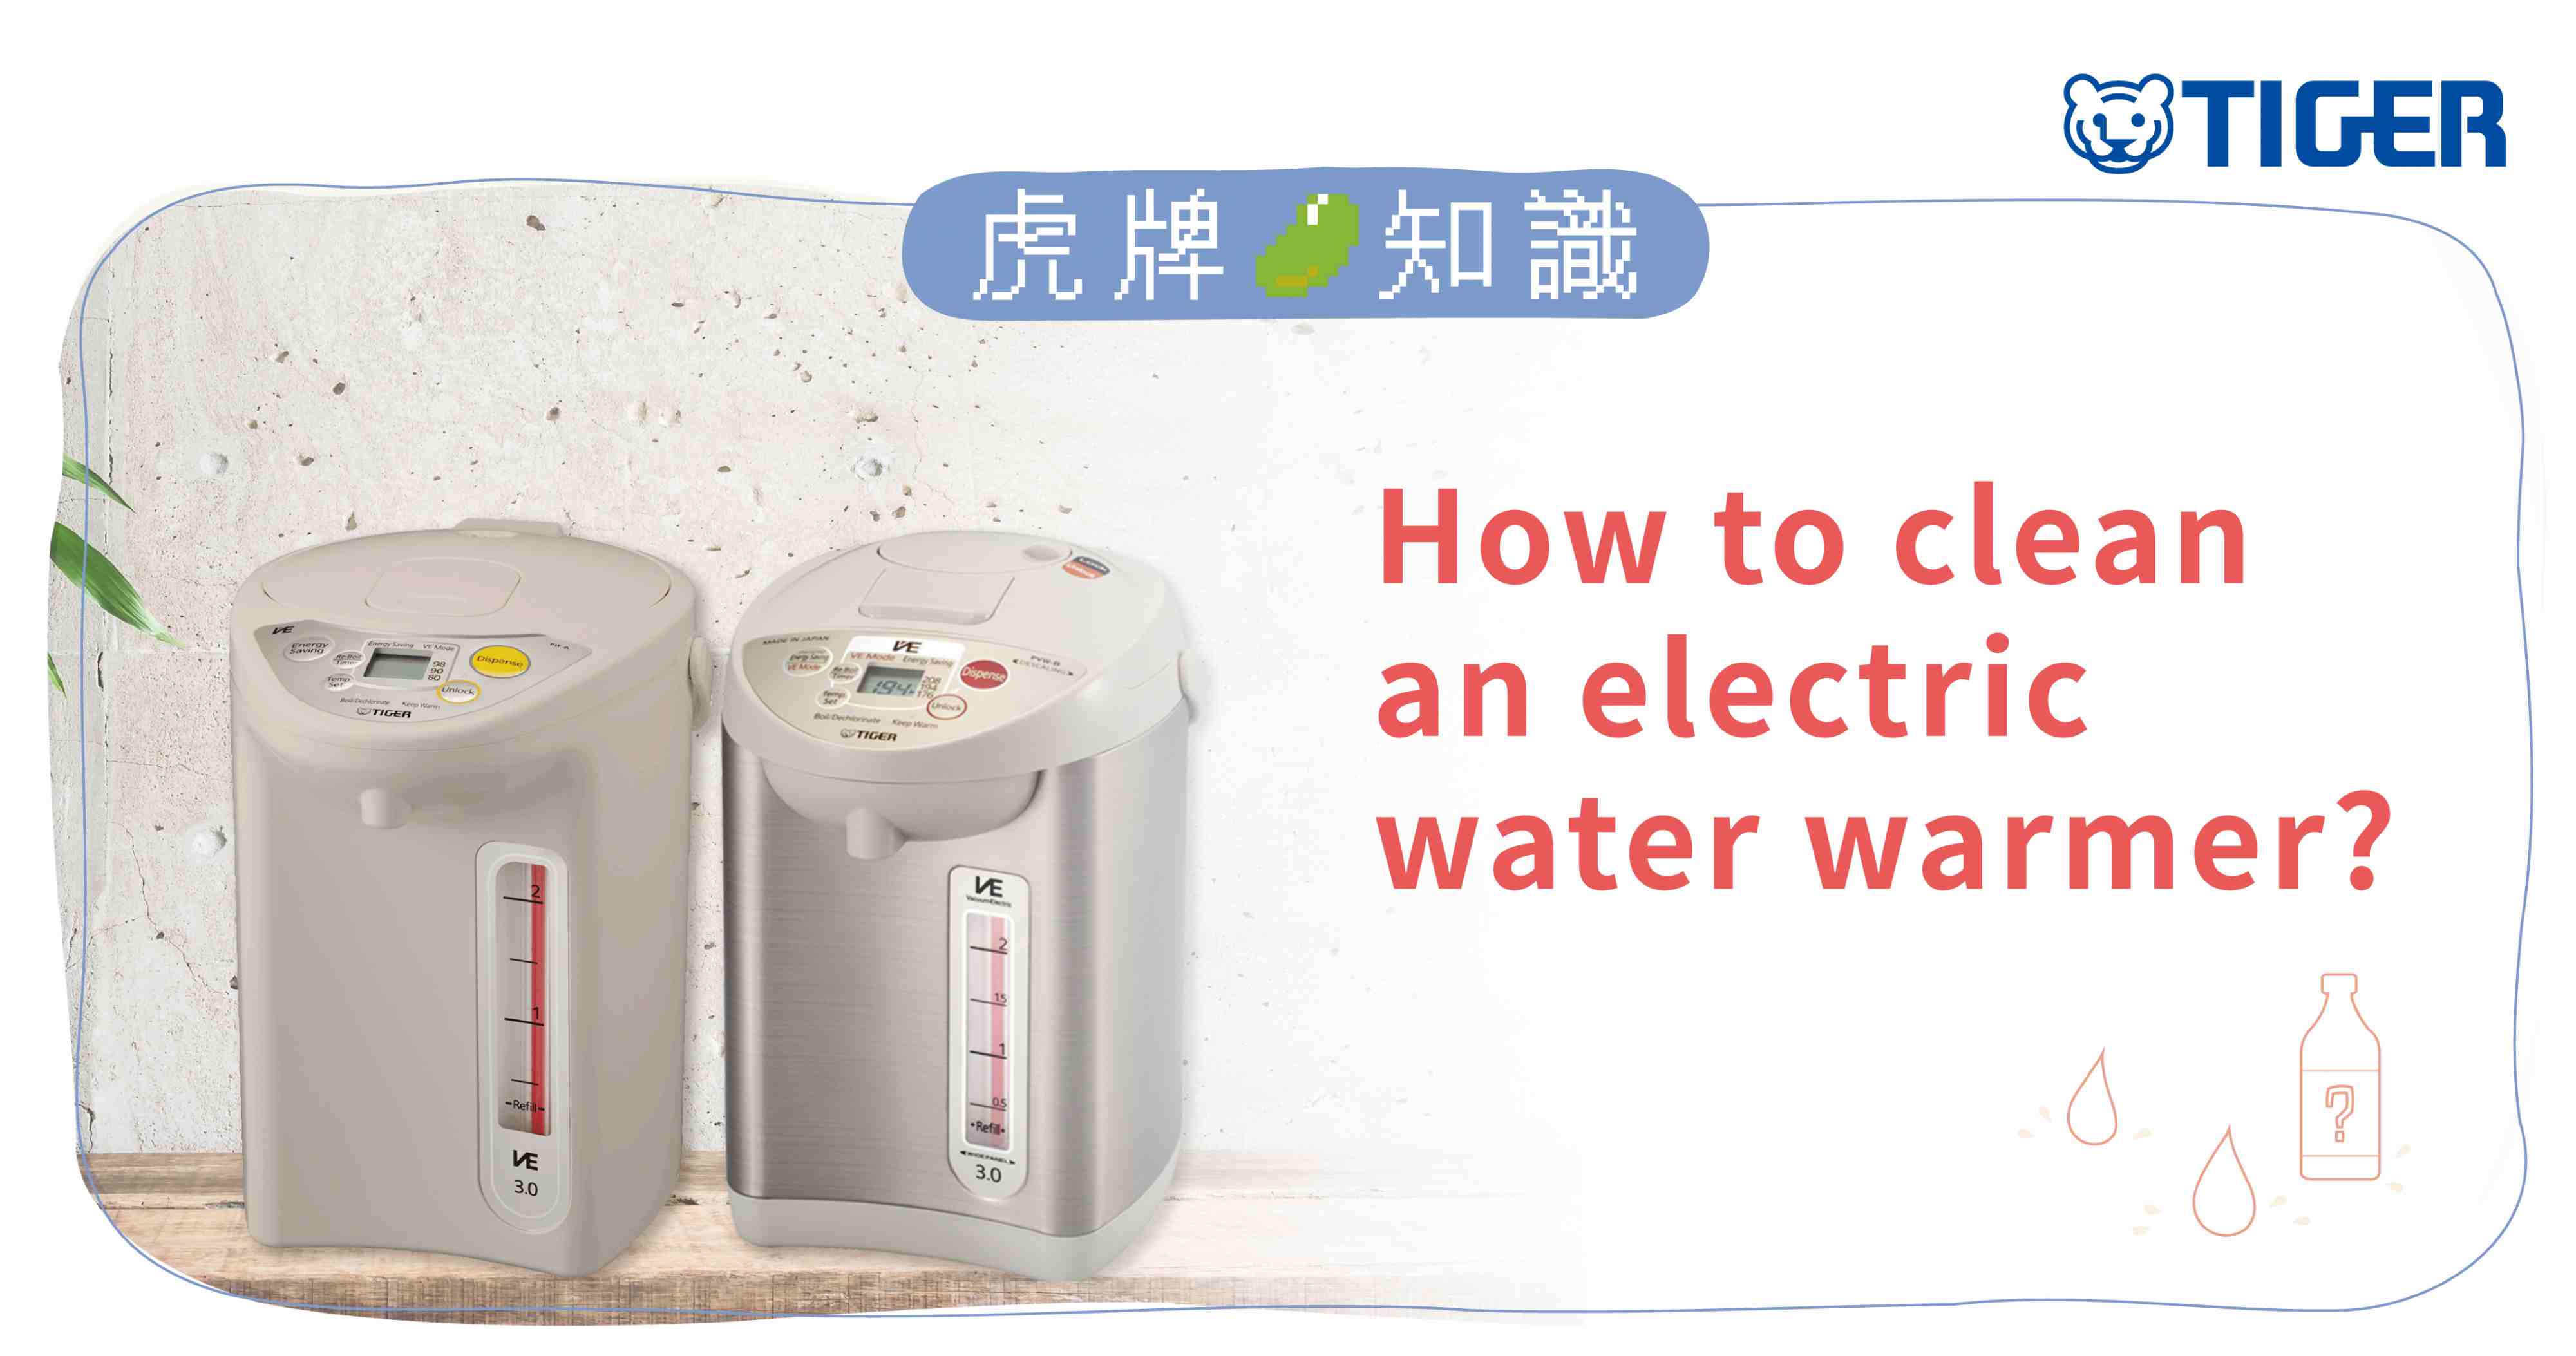 How to clean an electric water warmer